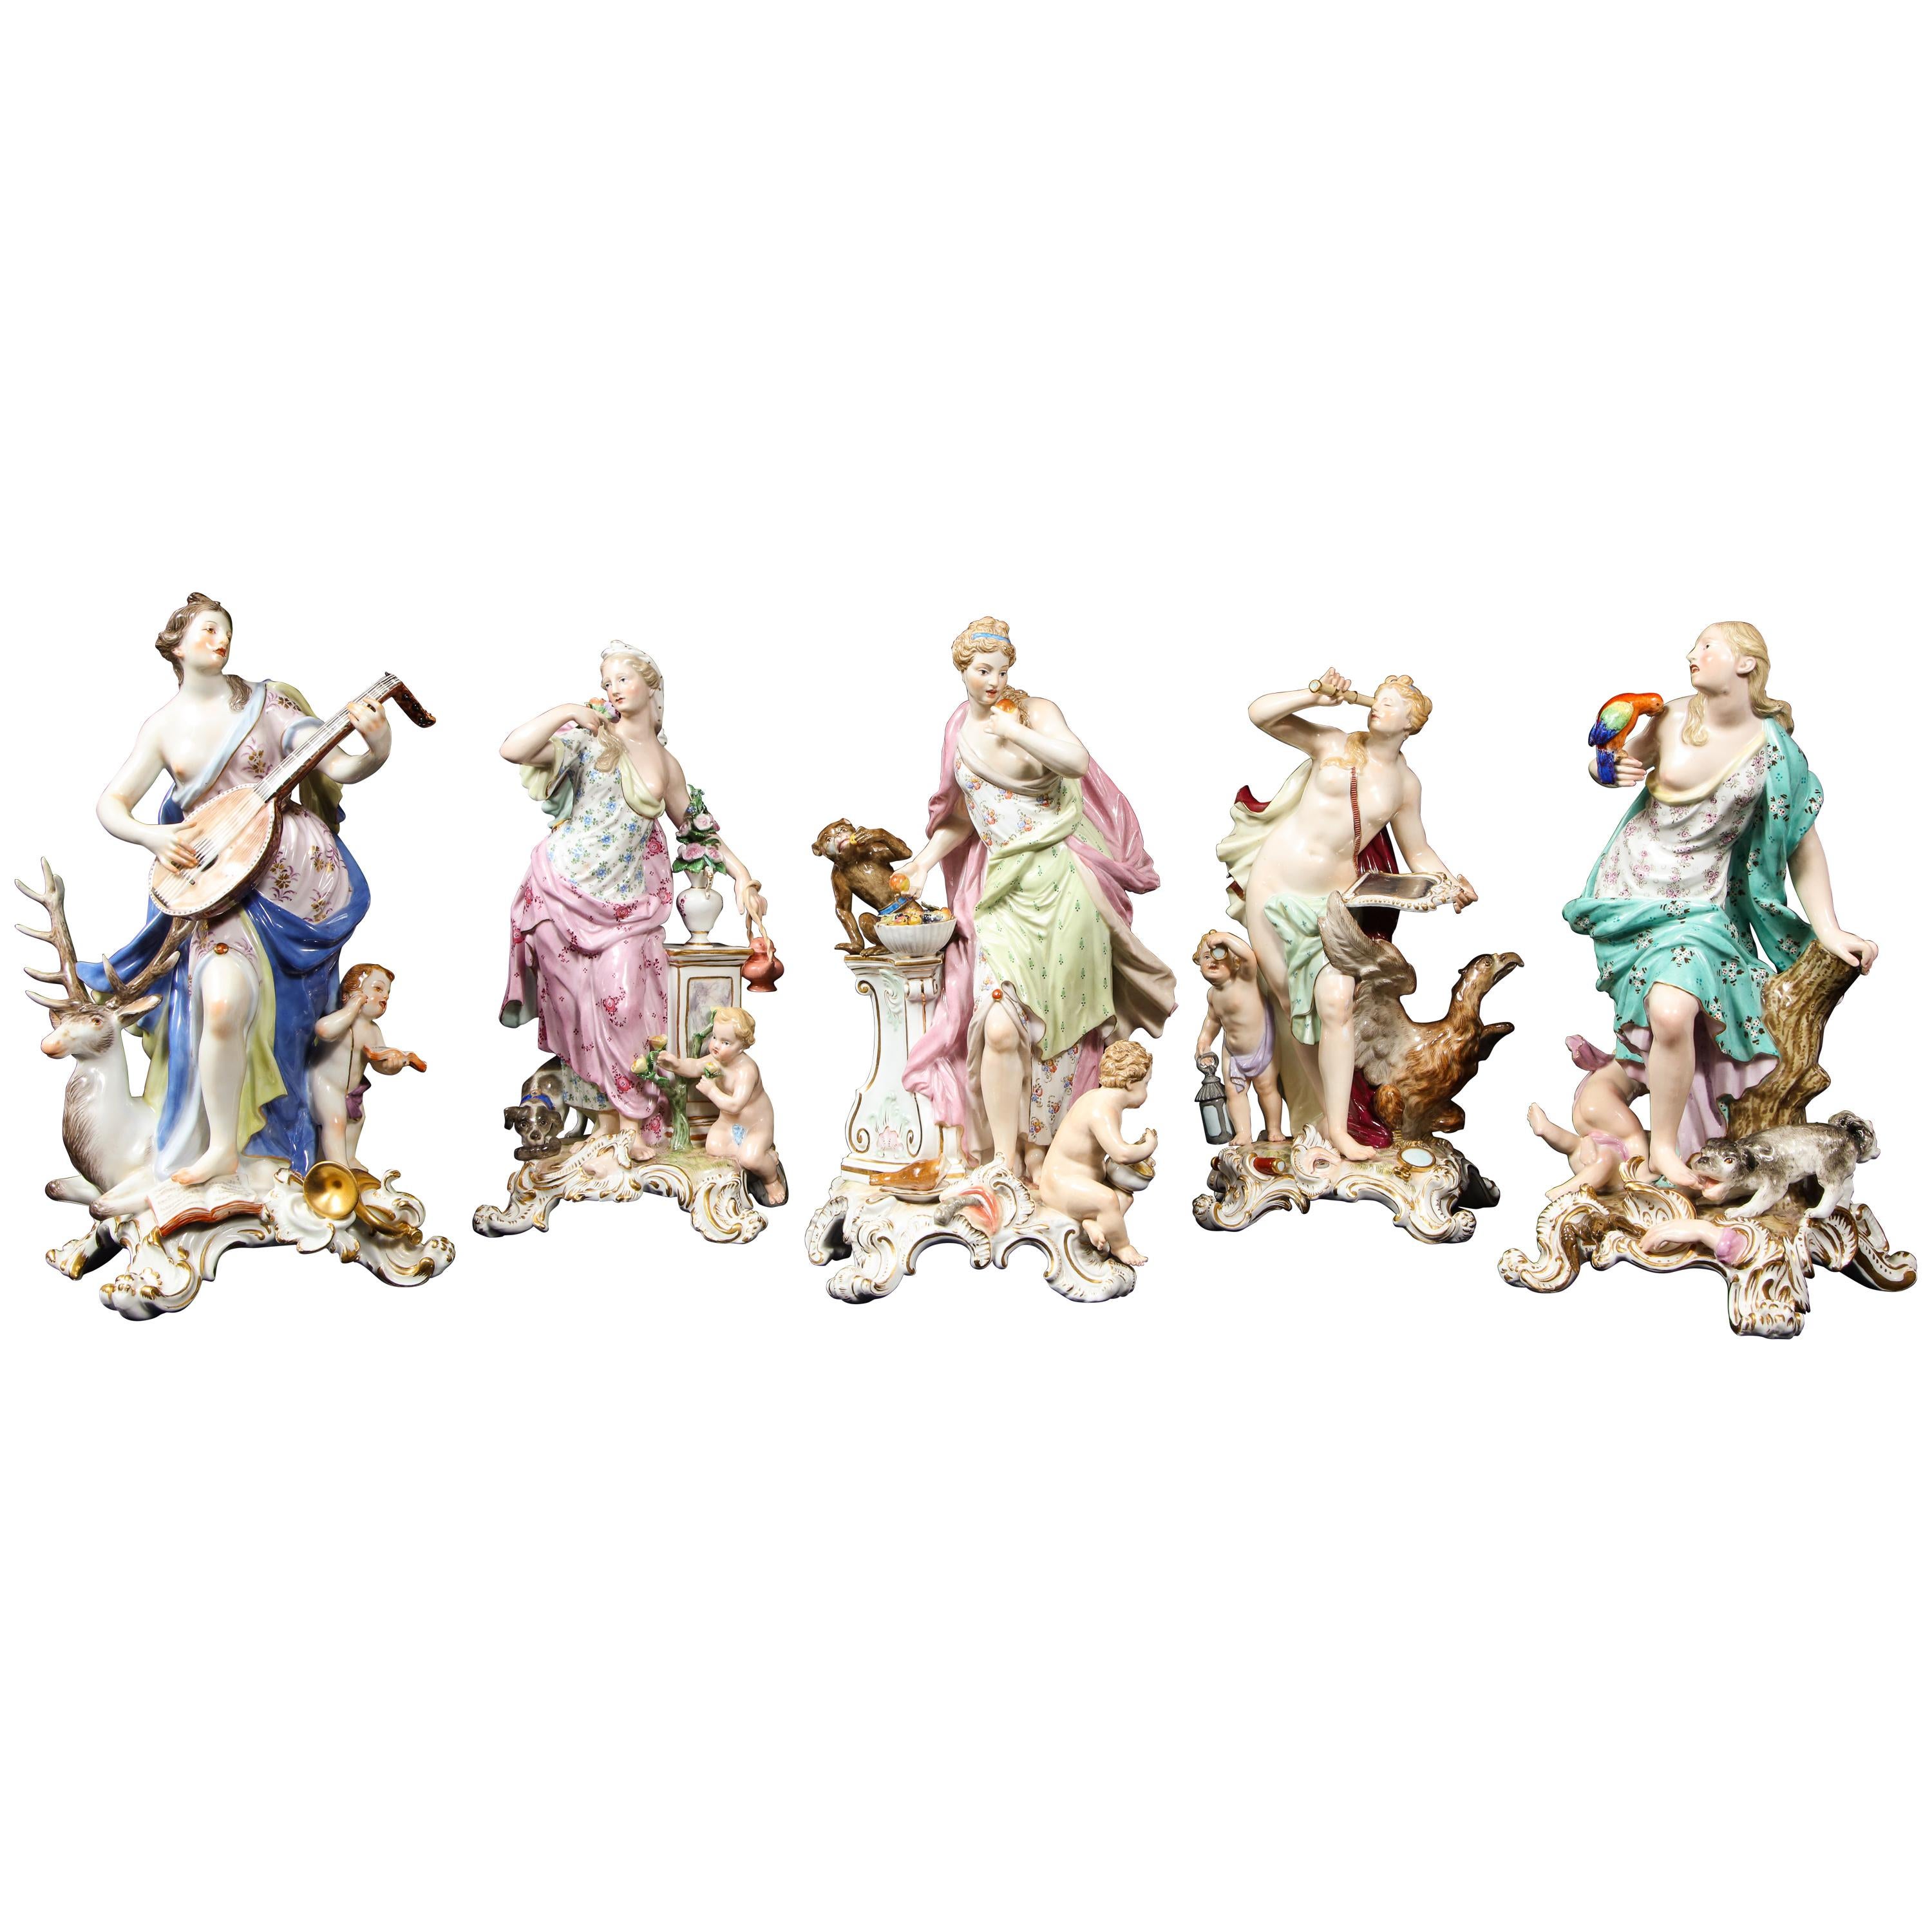 Set of 5 Meissen Figures Emblematic of the Senses by J.J. Kändler and Eberlein